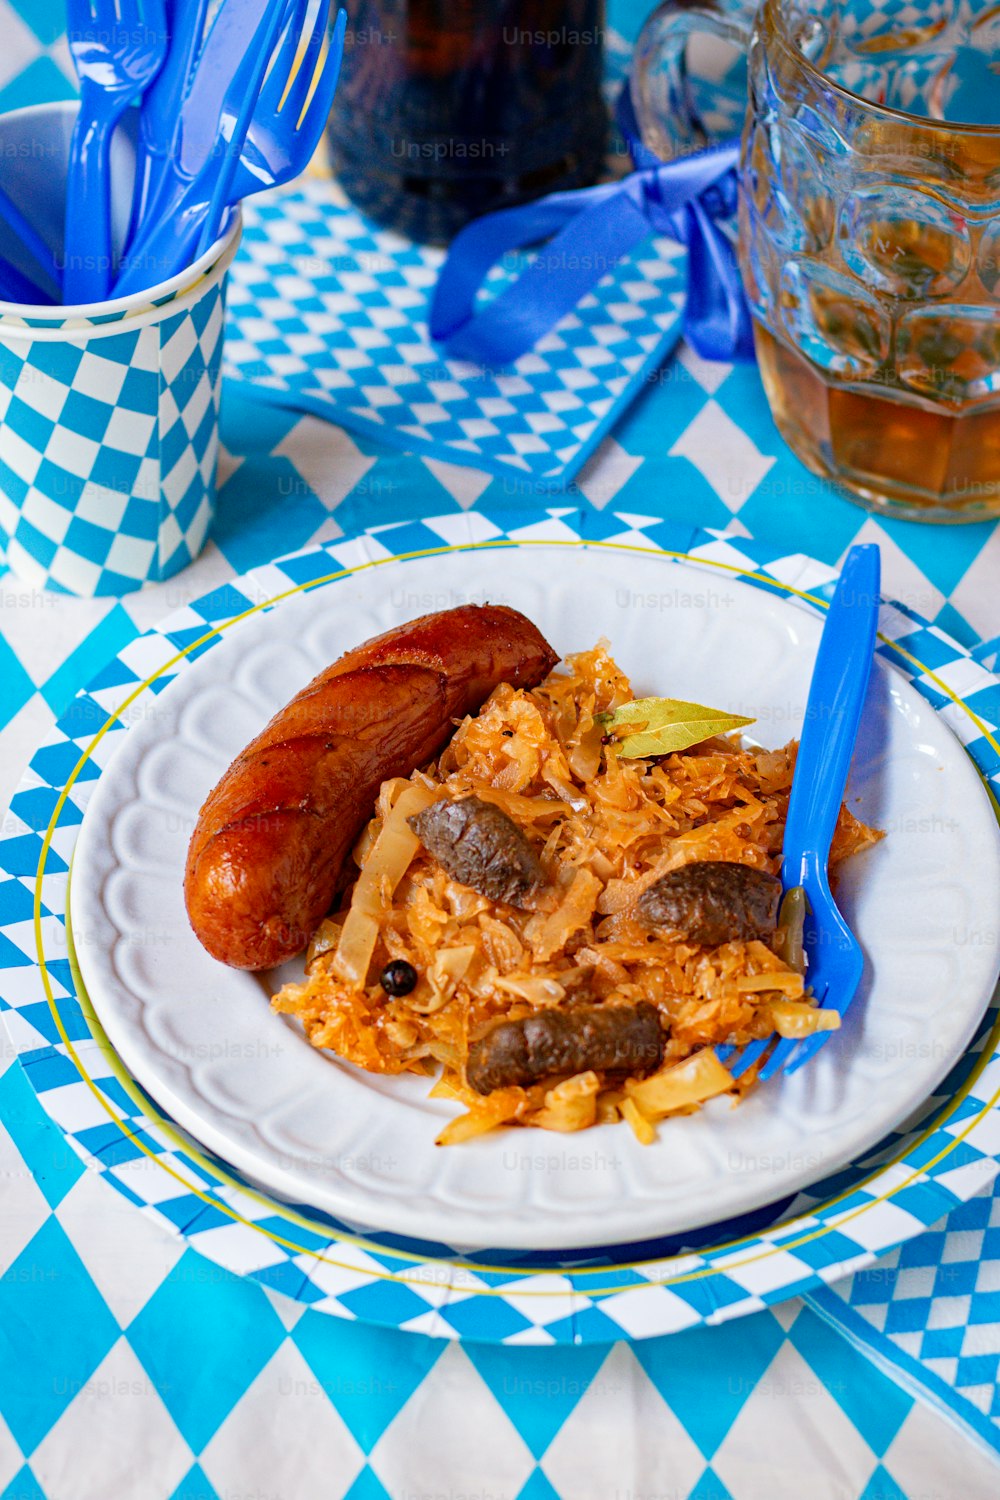 a plate of food on a blue and white checkered table cloth